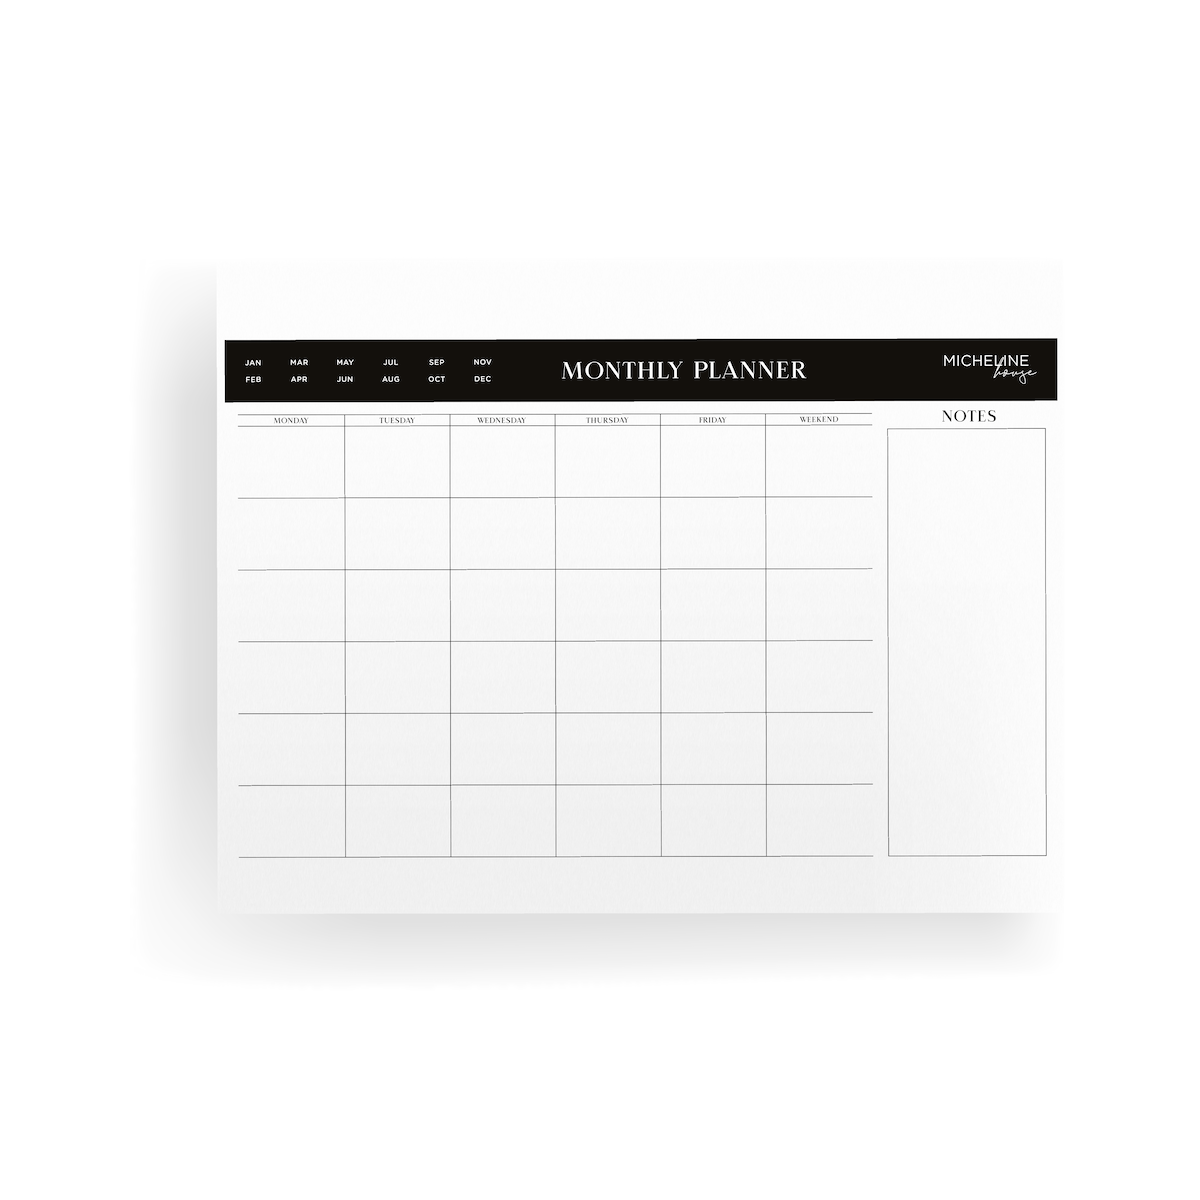 MONTHLY PLANNER